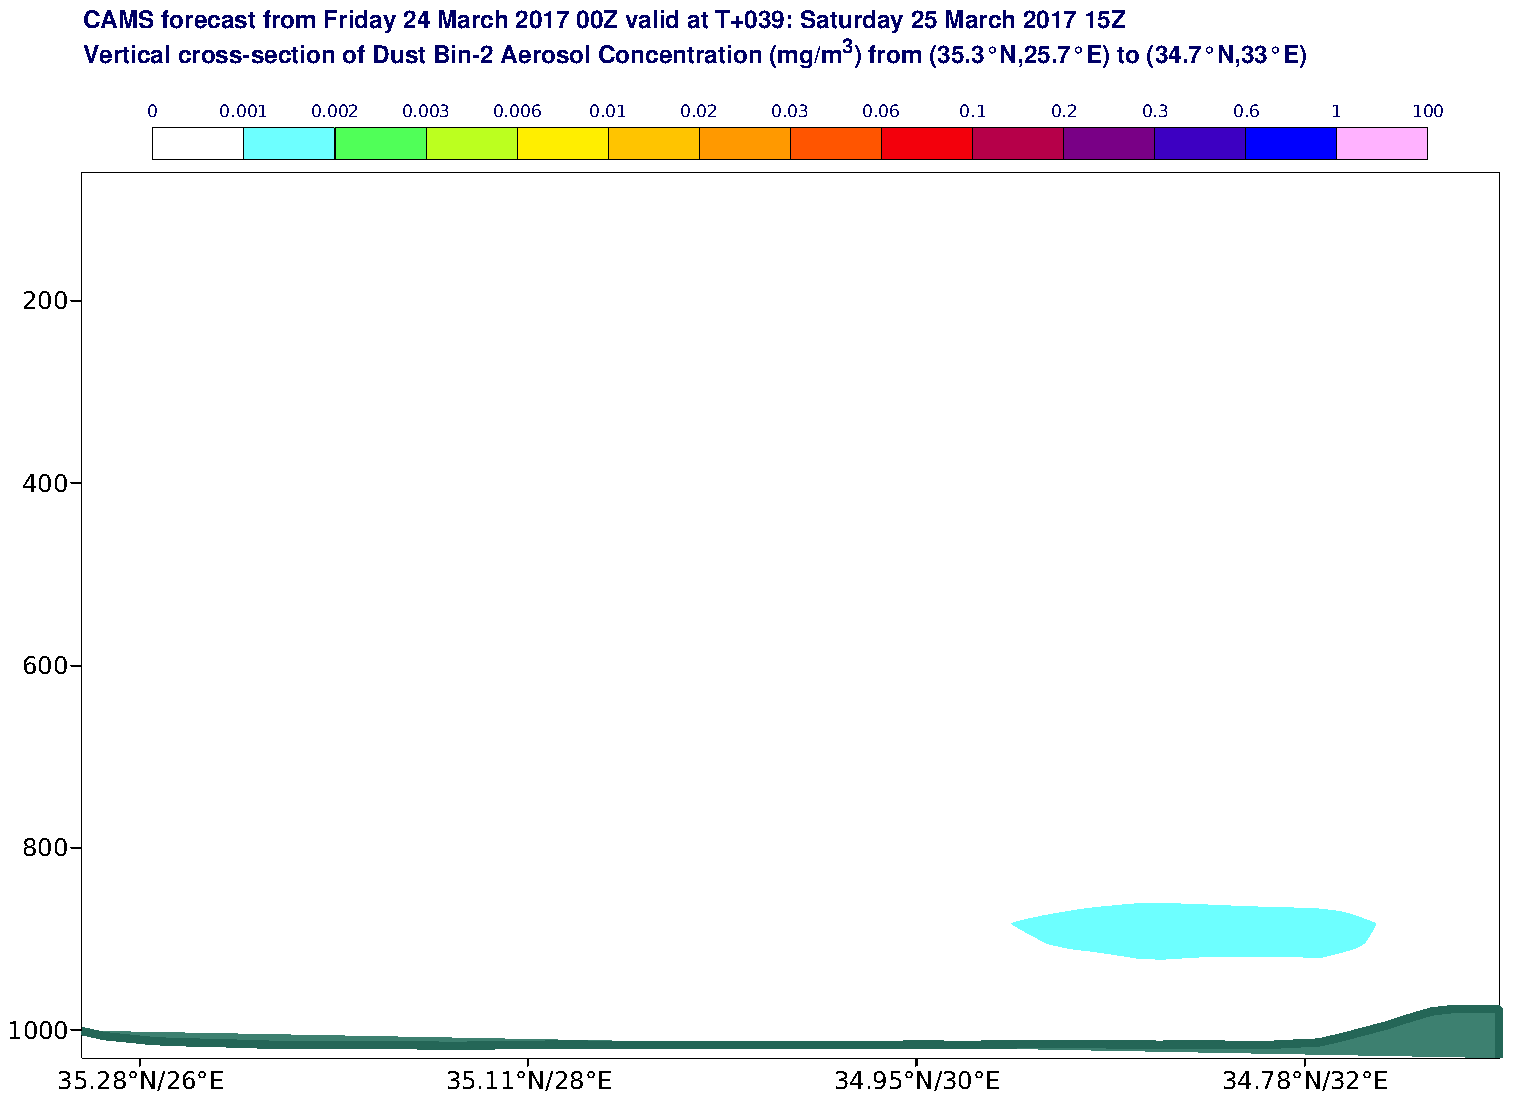 Vertical cross-section of Dust Bin-2 Aerosol Concentration (mg/m3) valid at T39 - 2017-03-25 15:00